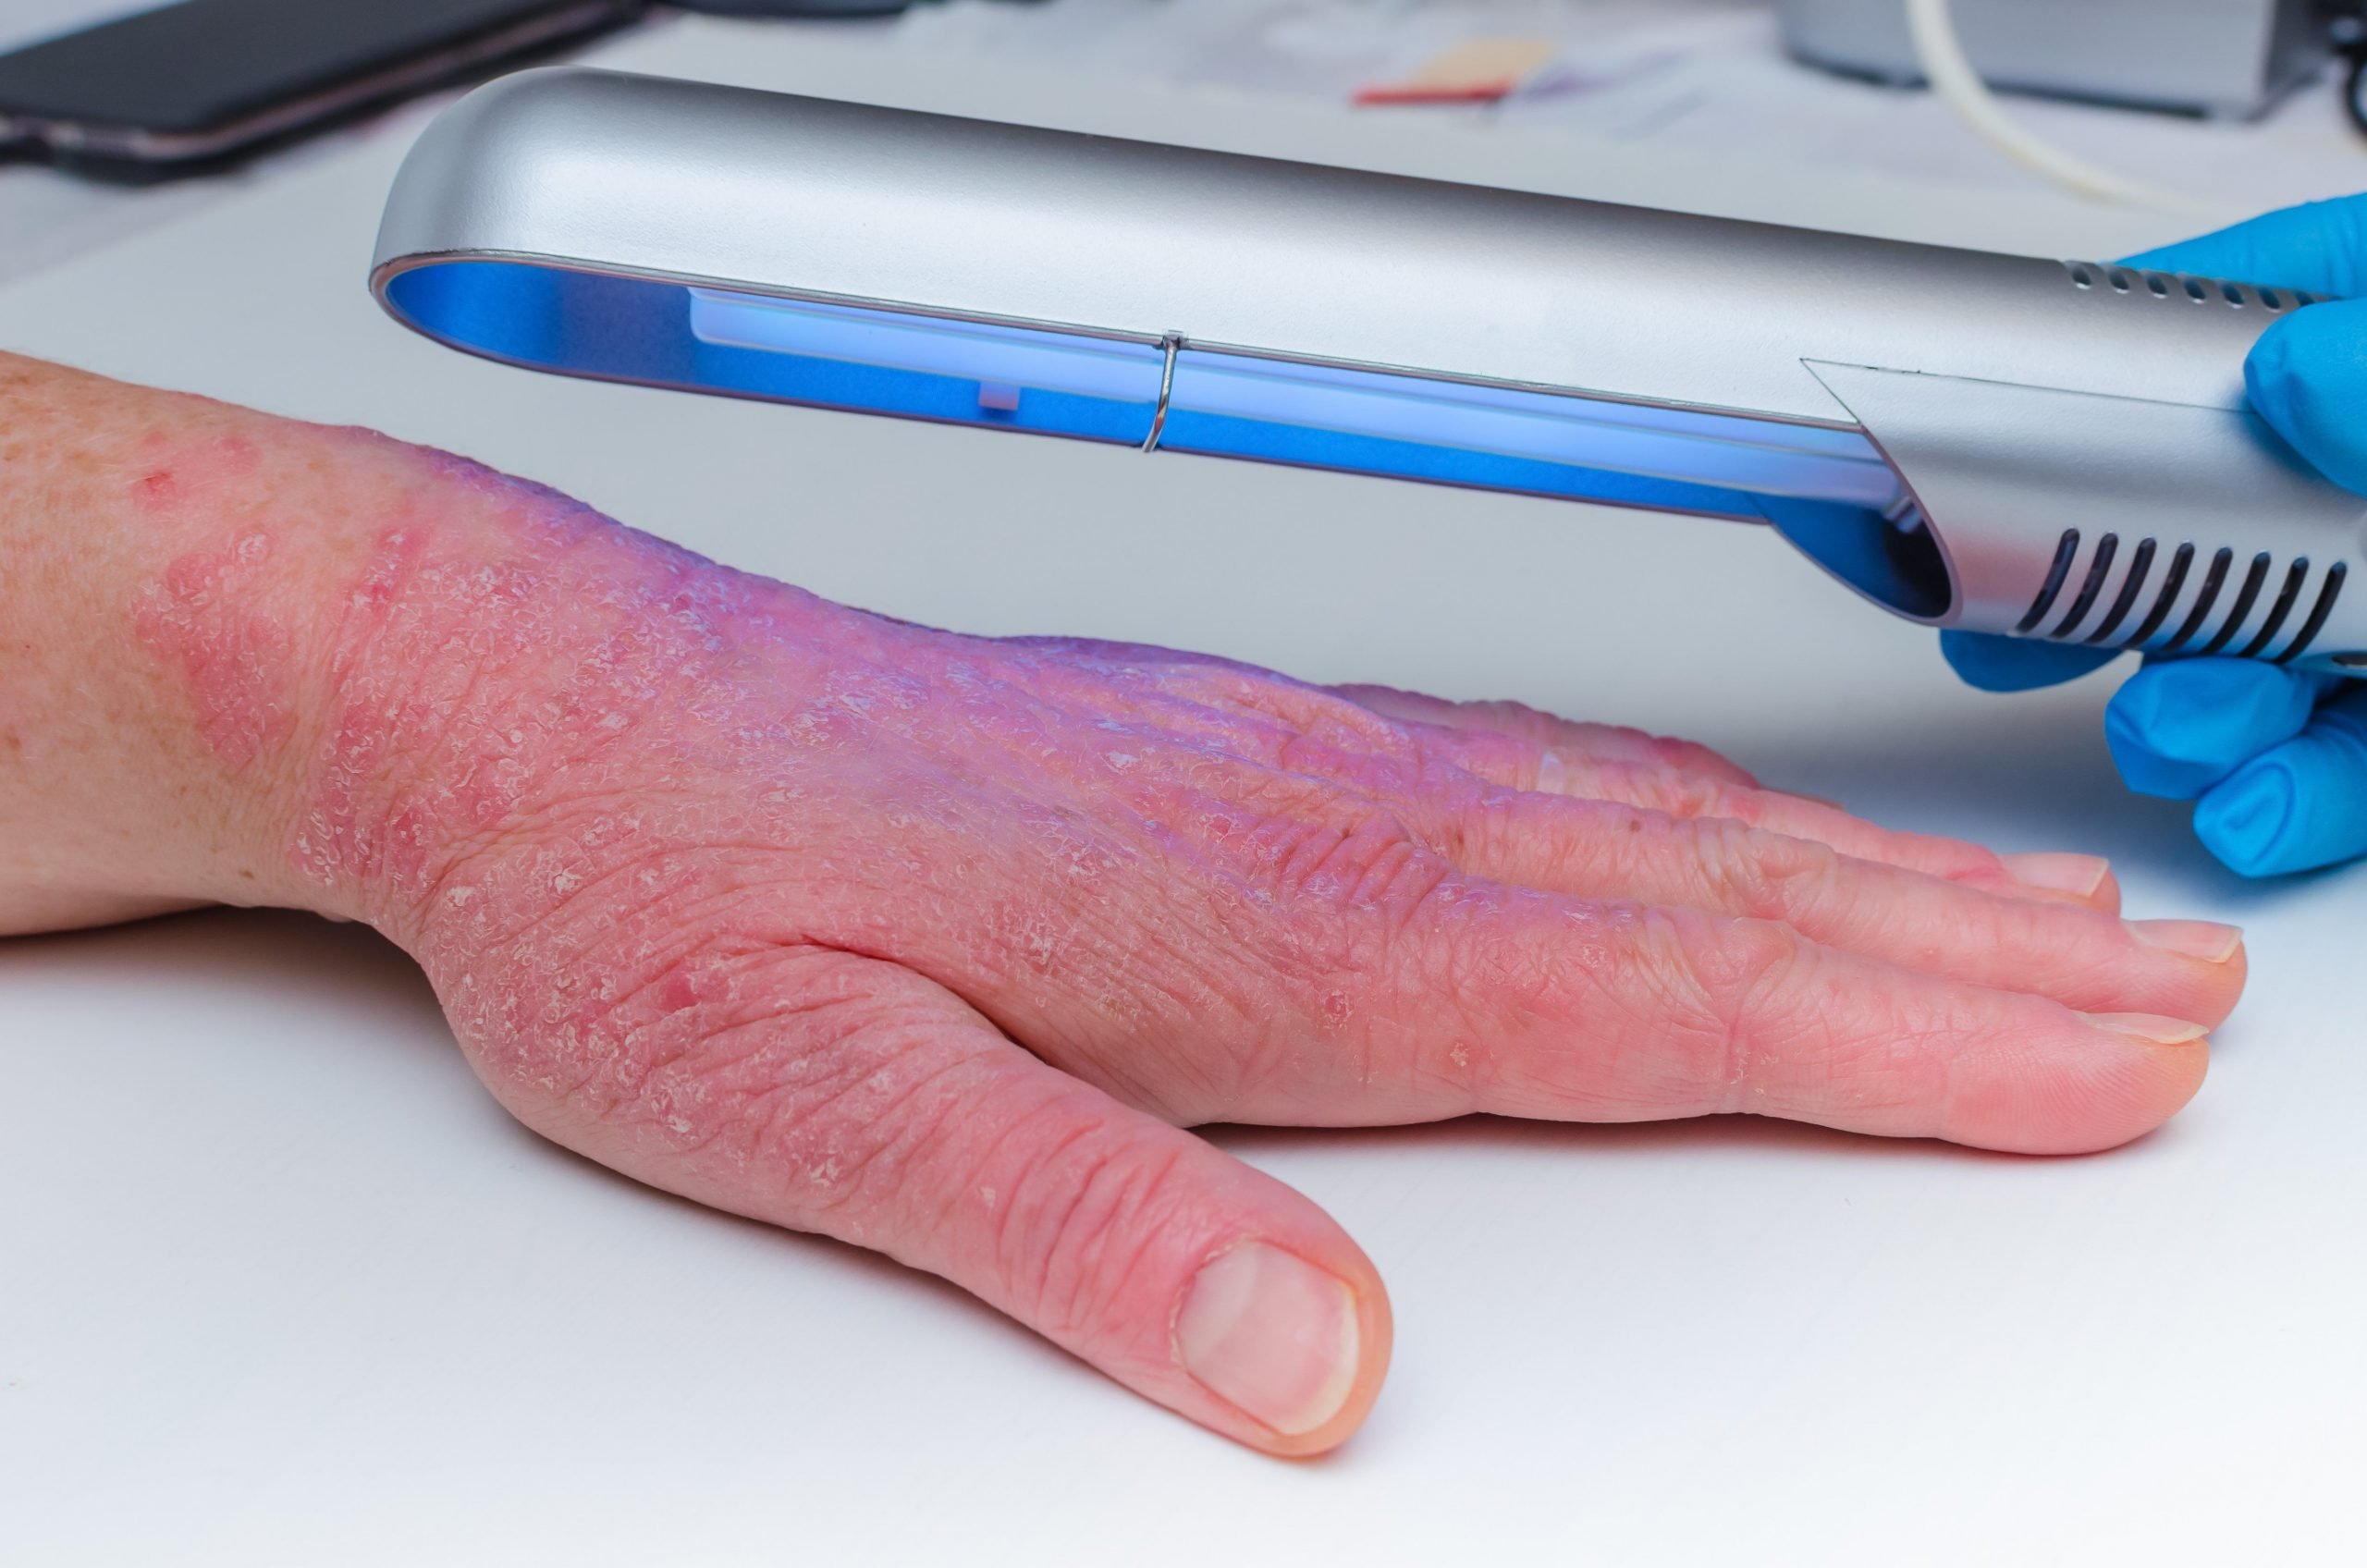 Phototherapy safe, effective for psoriasis